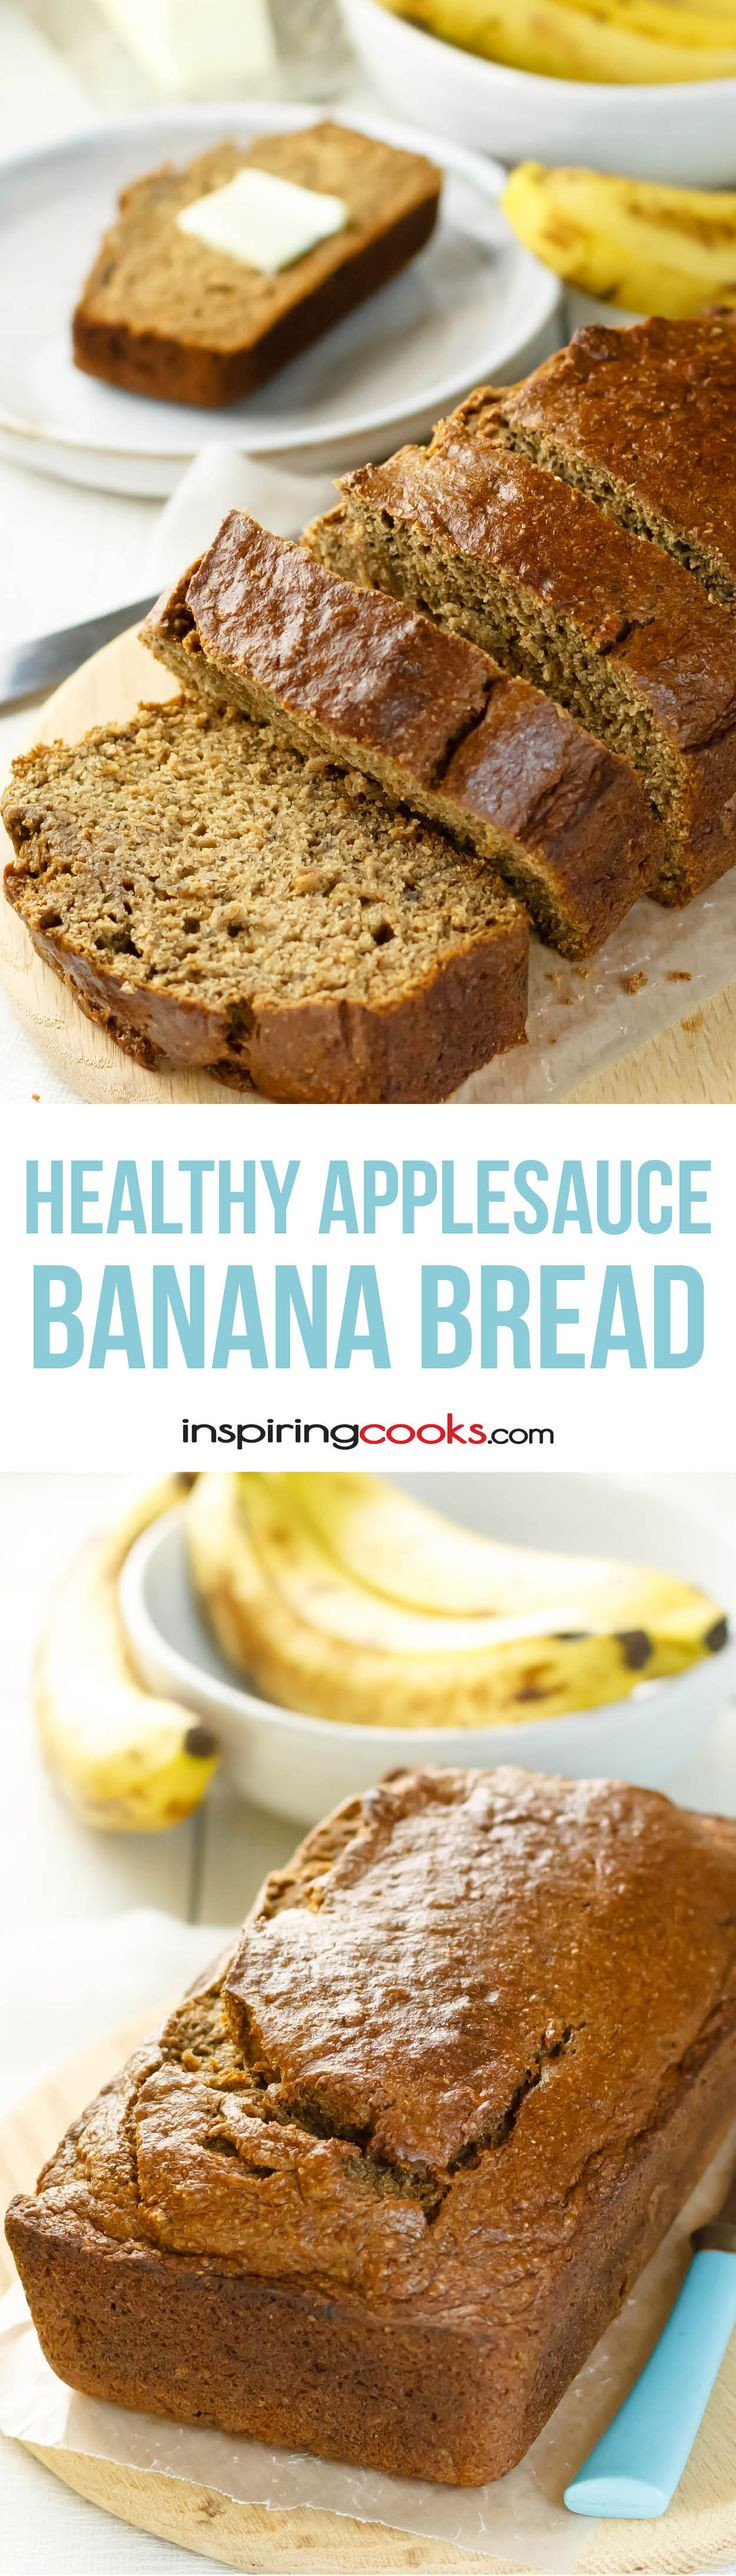 Healthy Banana Bread With Applesauce
 Check out Healthy Banana Bread with Applesauce It s so